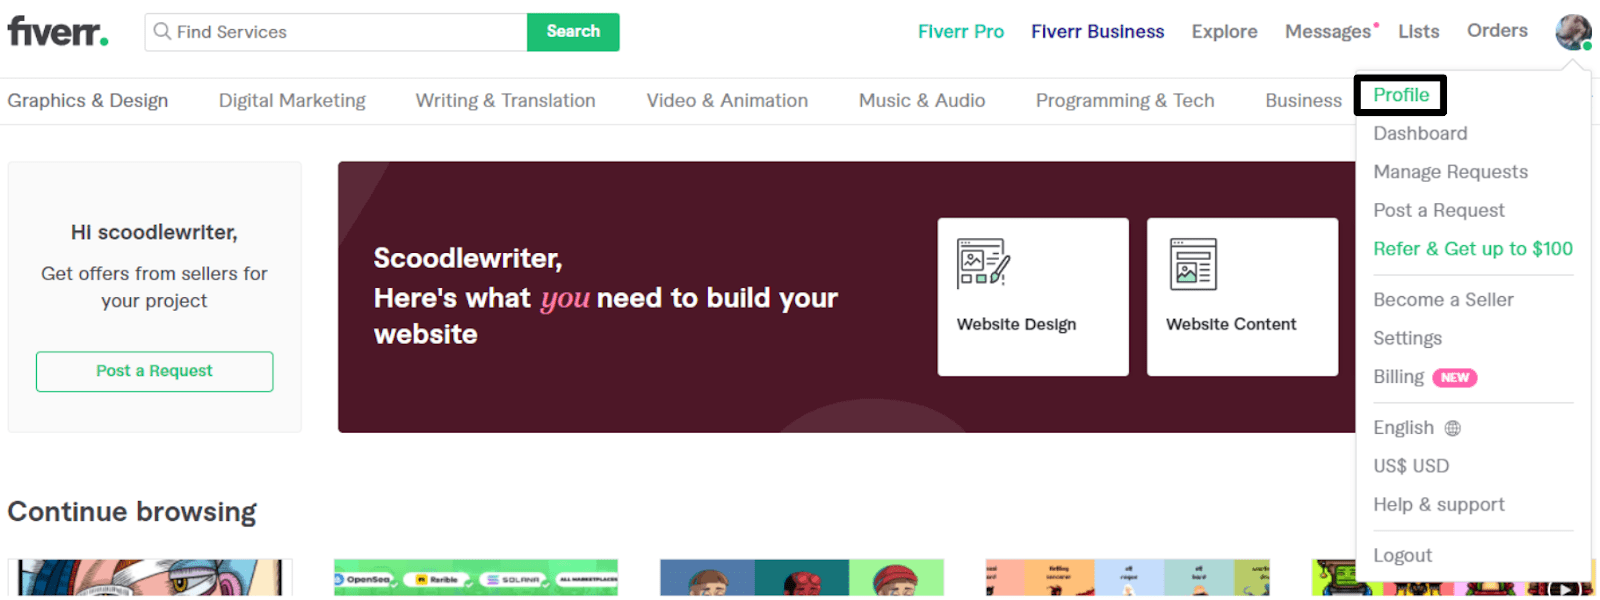 Your Fiverr dashboard